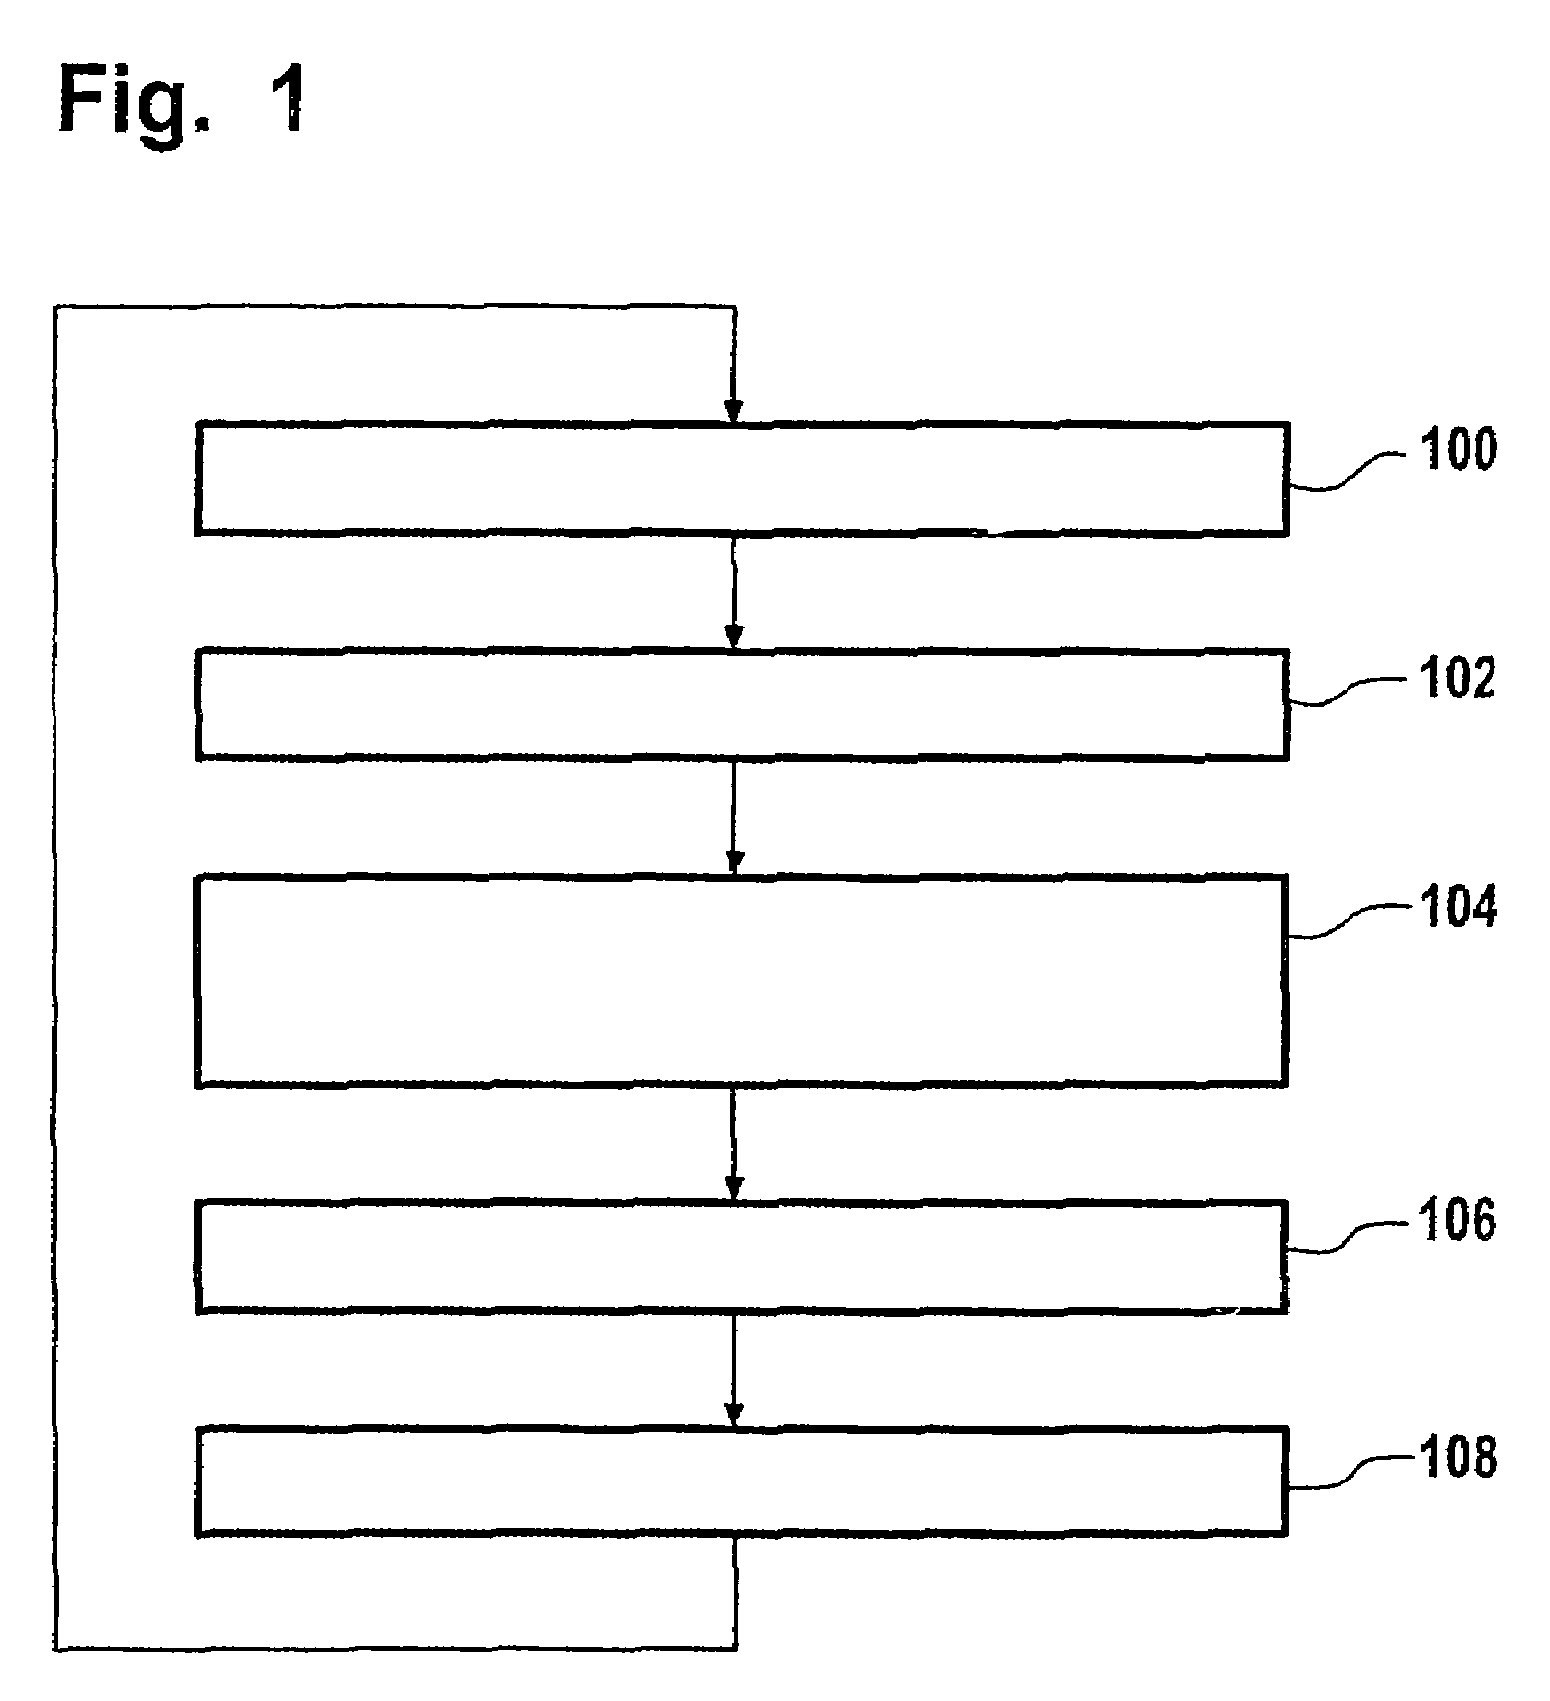 Process for monitoring and controlling nitrating processes with the aid of an online spectrometer